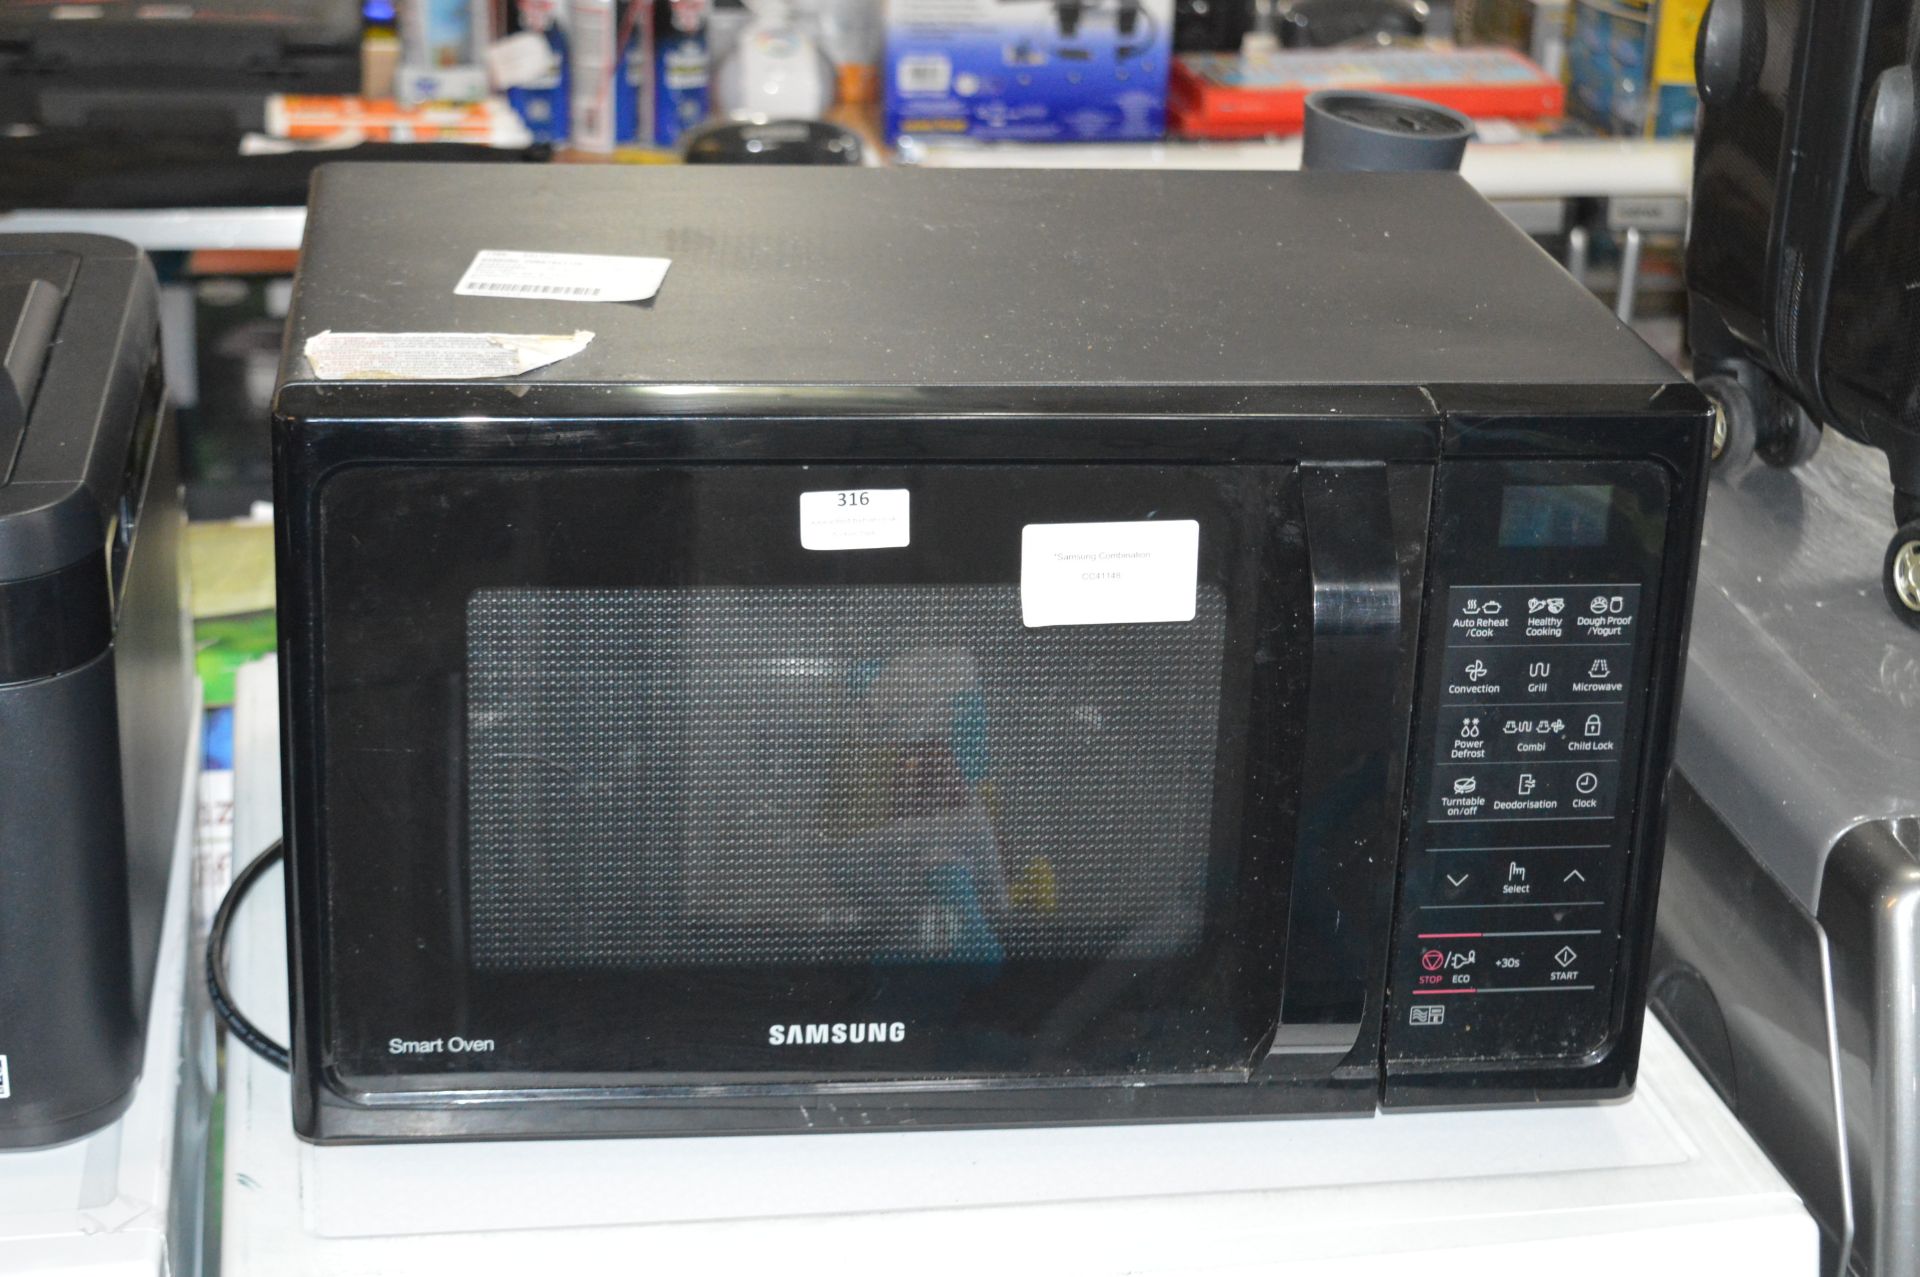 *Samsung Combination Microwave Oven